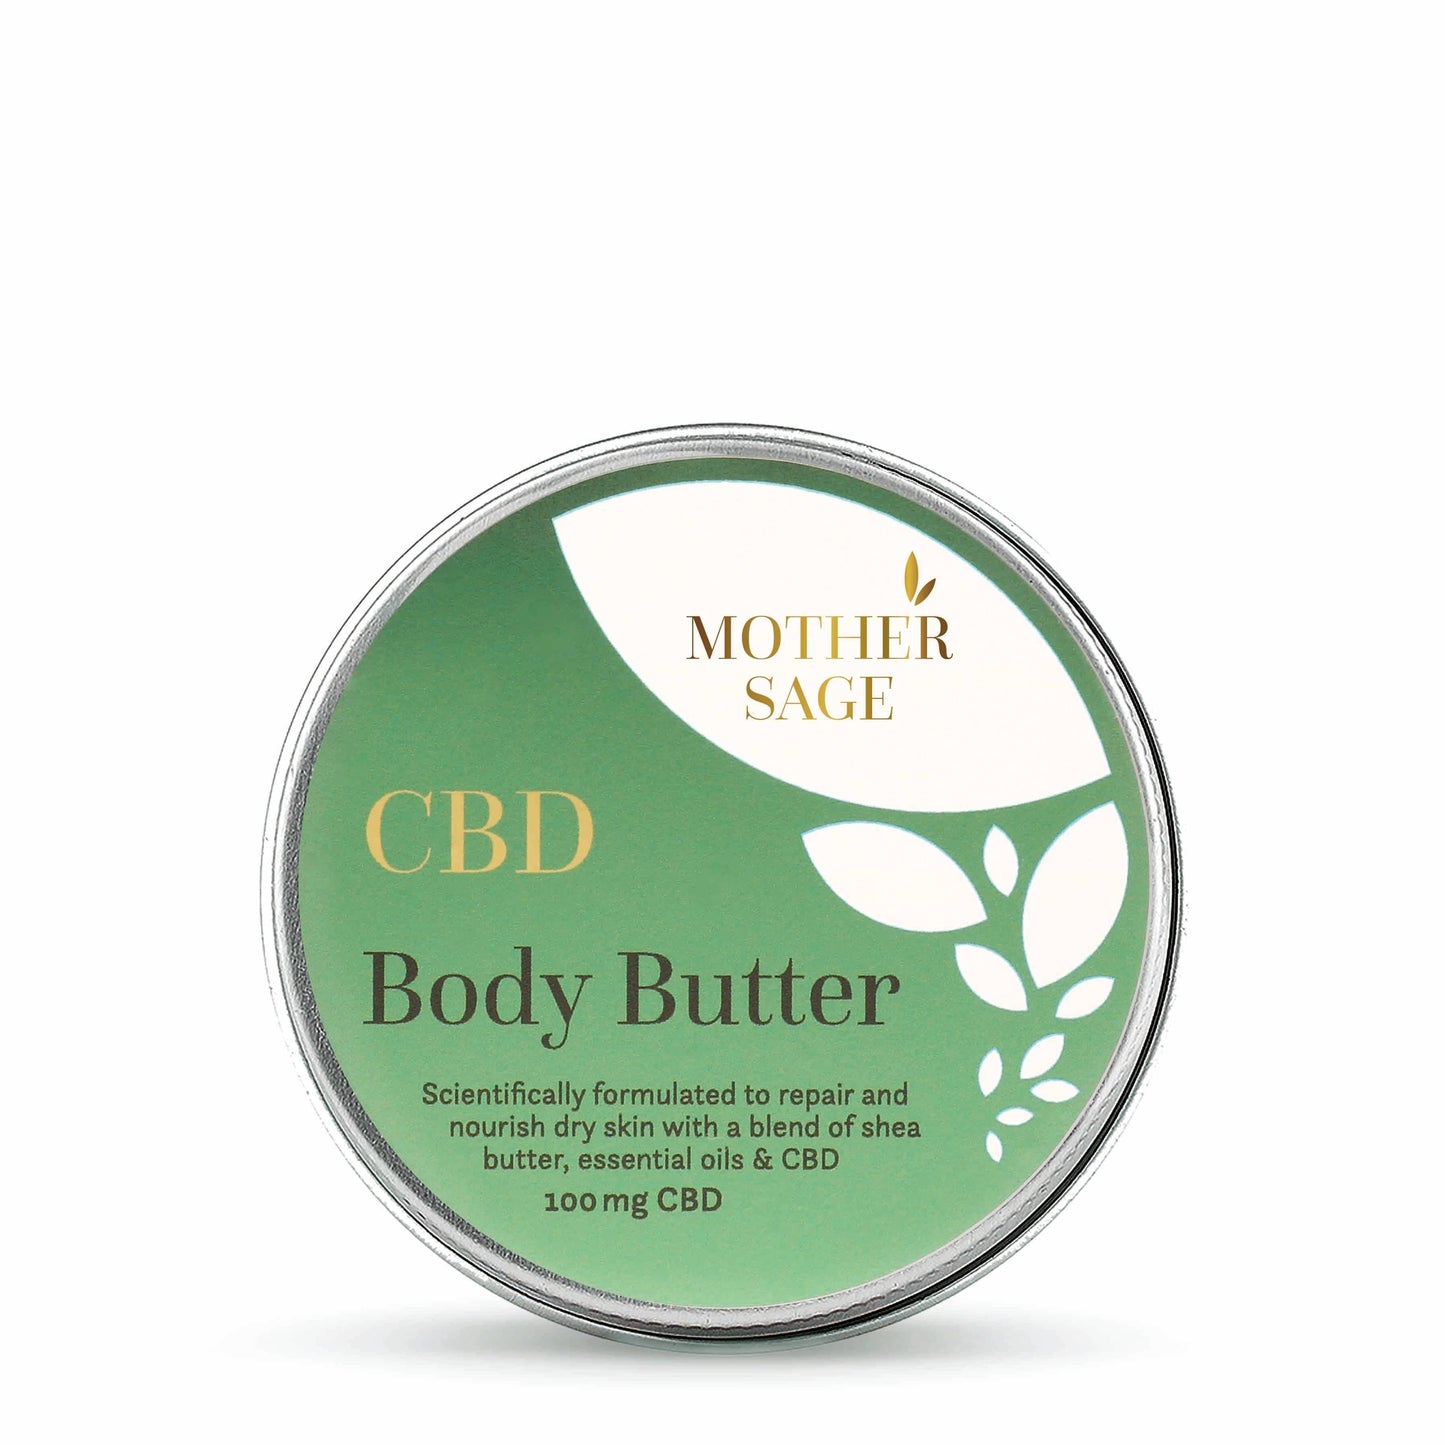 MotherSage MotherSage Body Butter